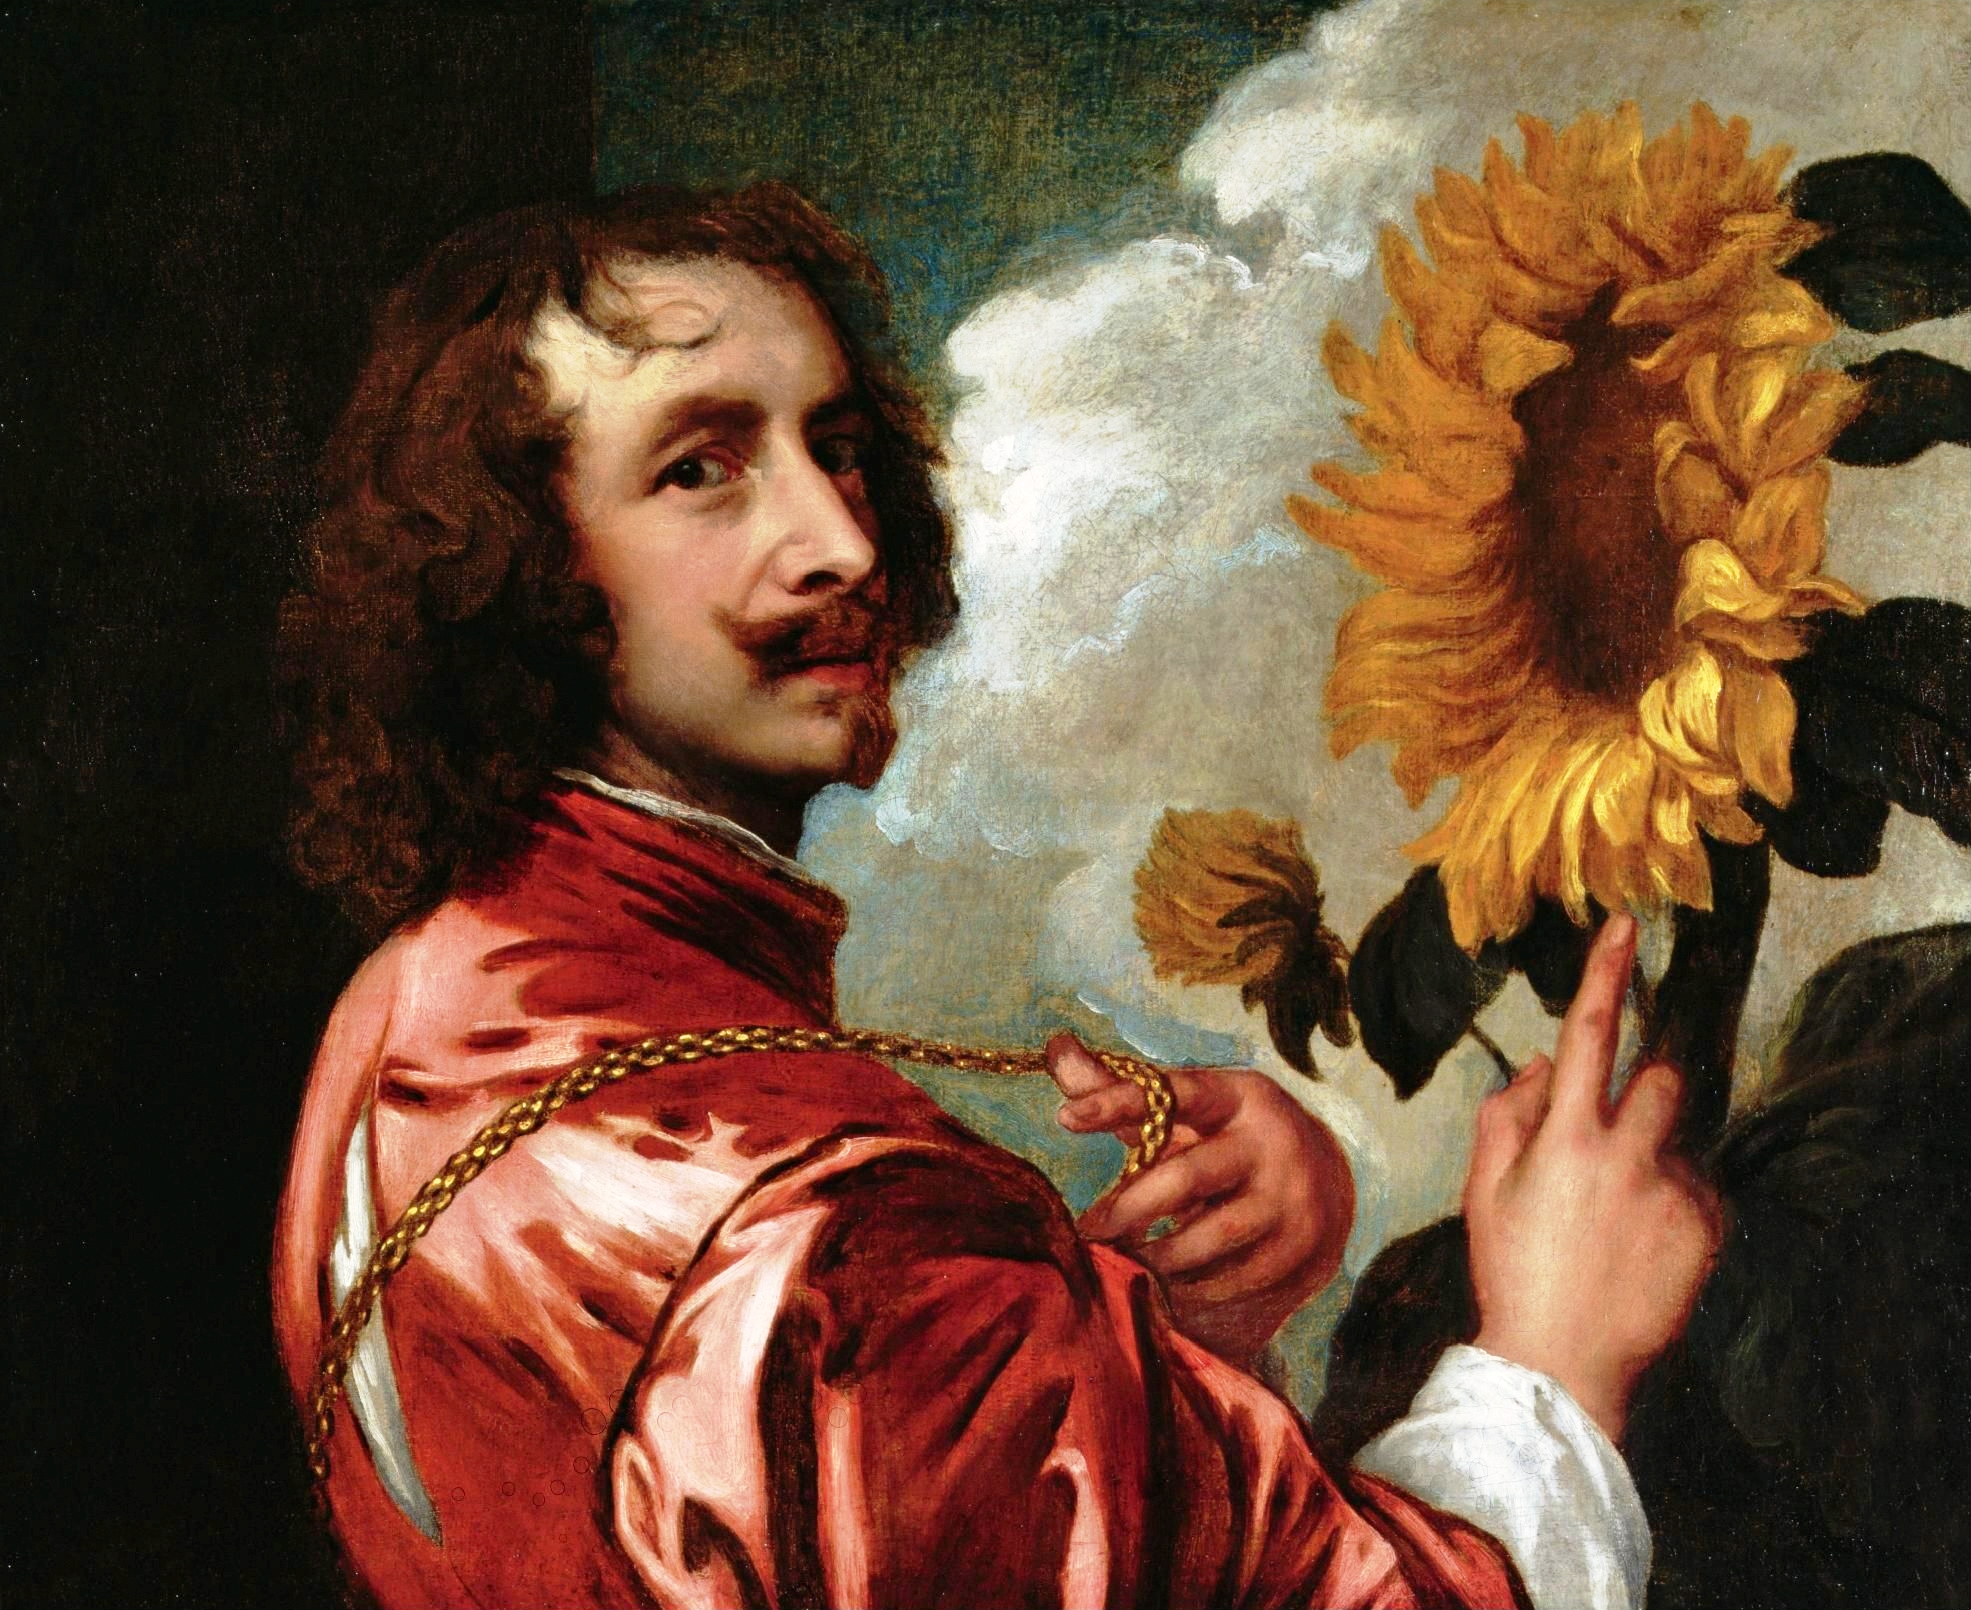 Self-portrait with a Sunflower by Anthony van Dyck - 1633 - 58.4 × 73 cm private collection